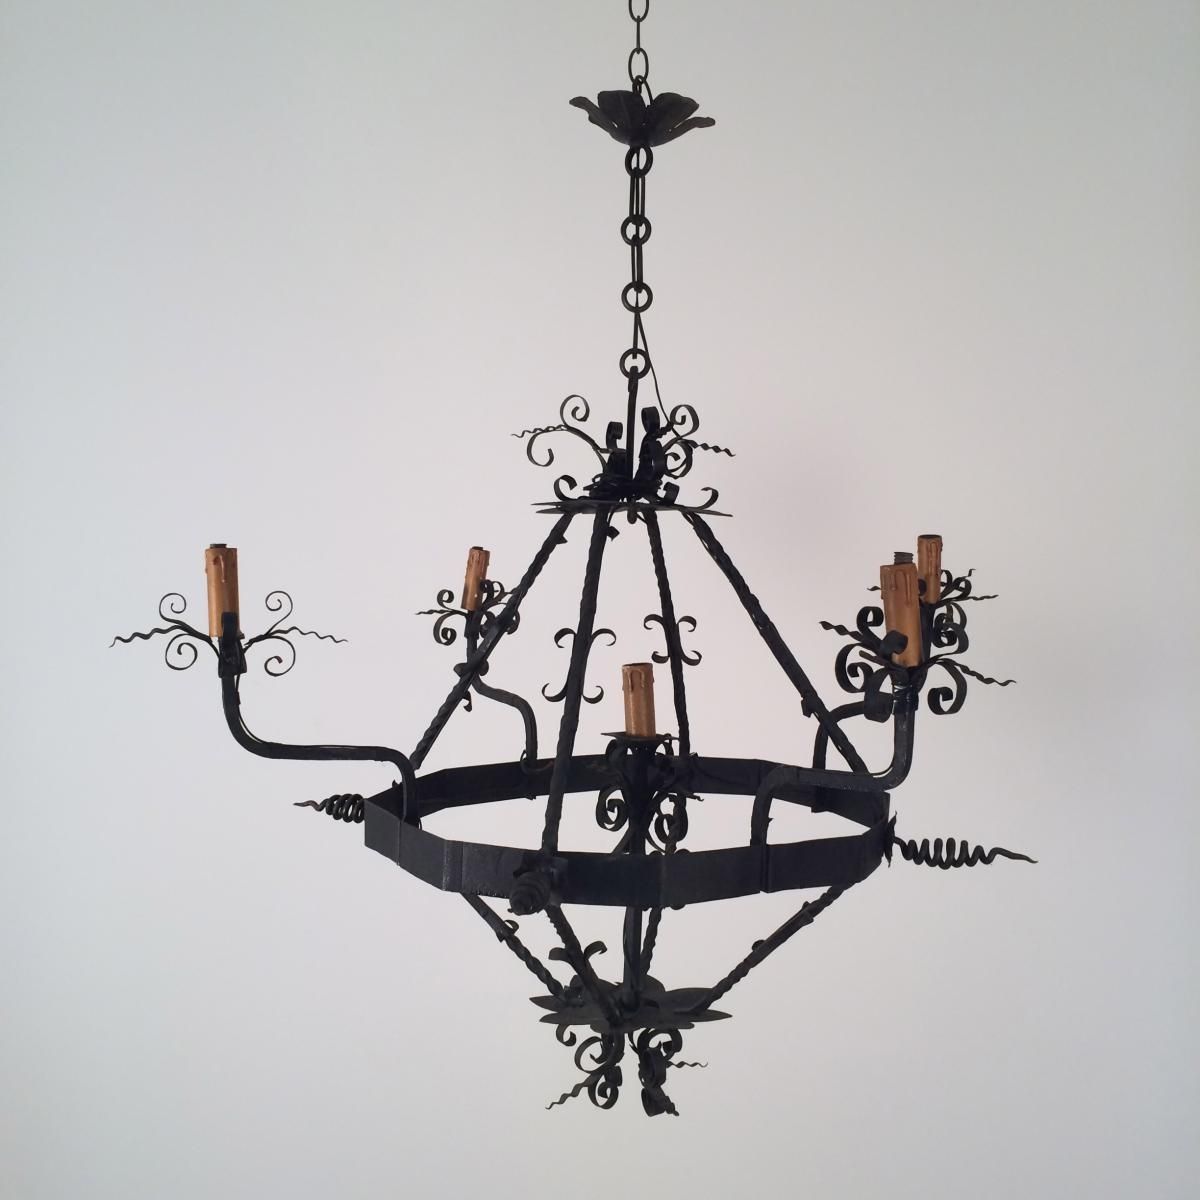 Vintage Wrought Iron Chandelier 1960s For Sale At Pamono Inside Vintage Wrought Iron Chandelier (View 5 of 15)